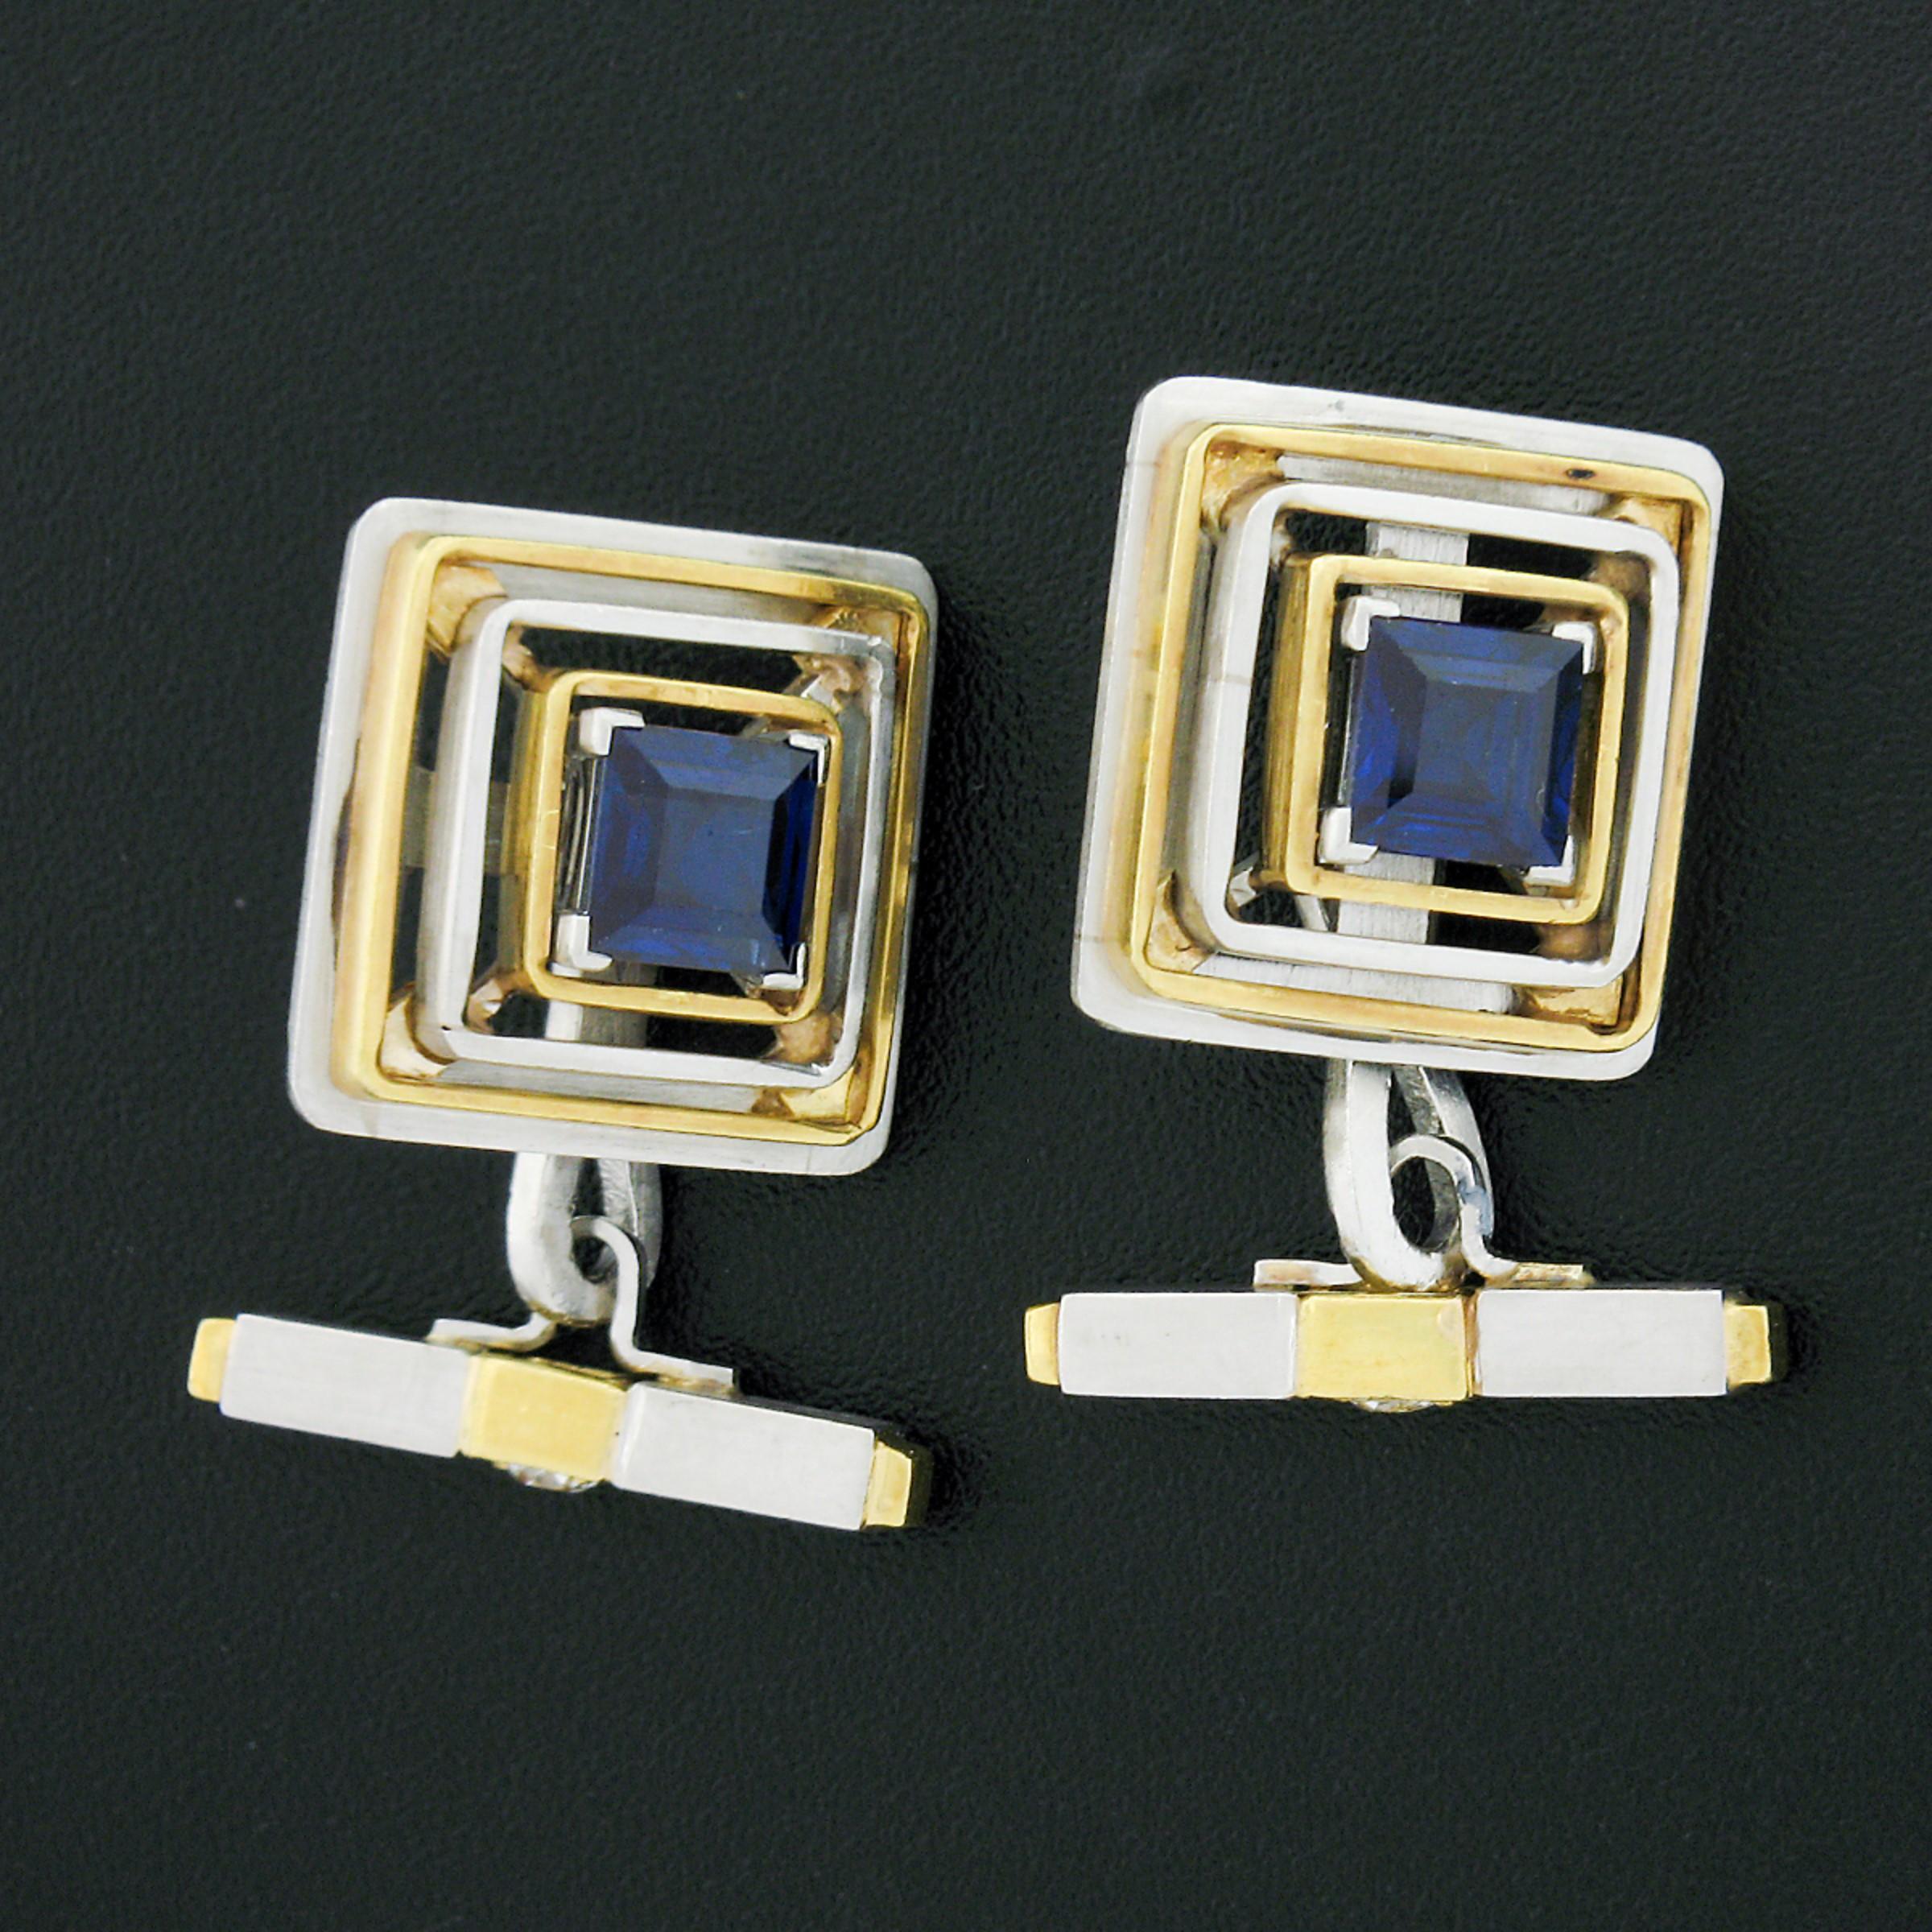 This fine pair of vintage cuff links was crafted from solid .950 platinum and 18k yellow gold and features 2 square step cut, GIA certified, TOP QUALITY sapphire stones. The sapphires have a true royal blue color with NO HEATING indications. The